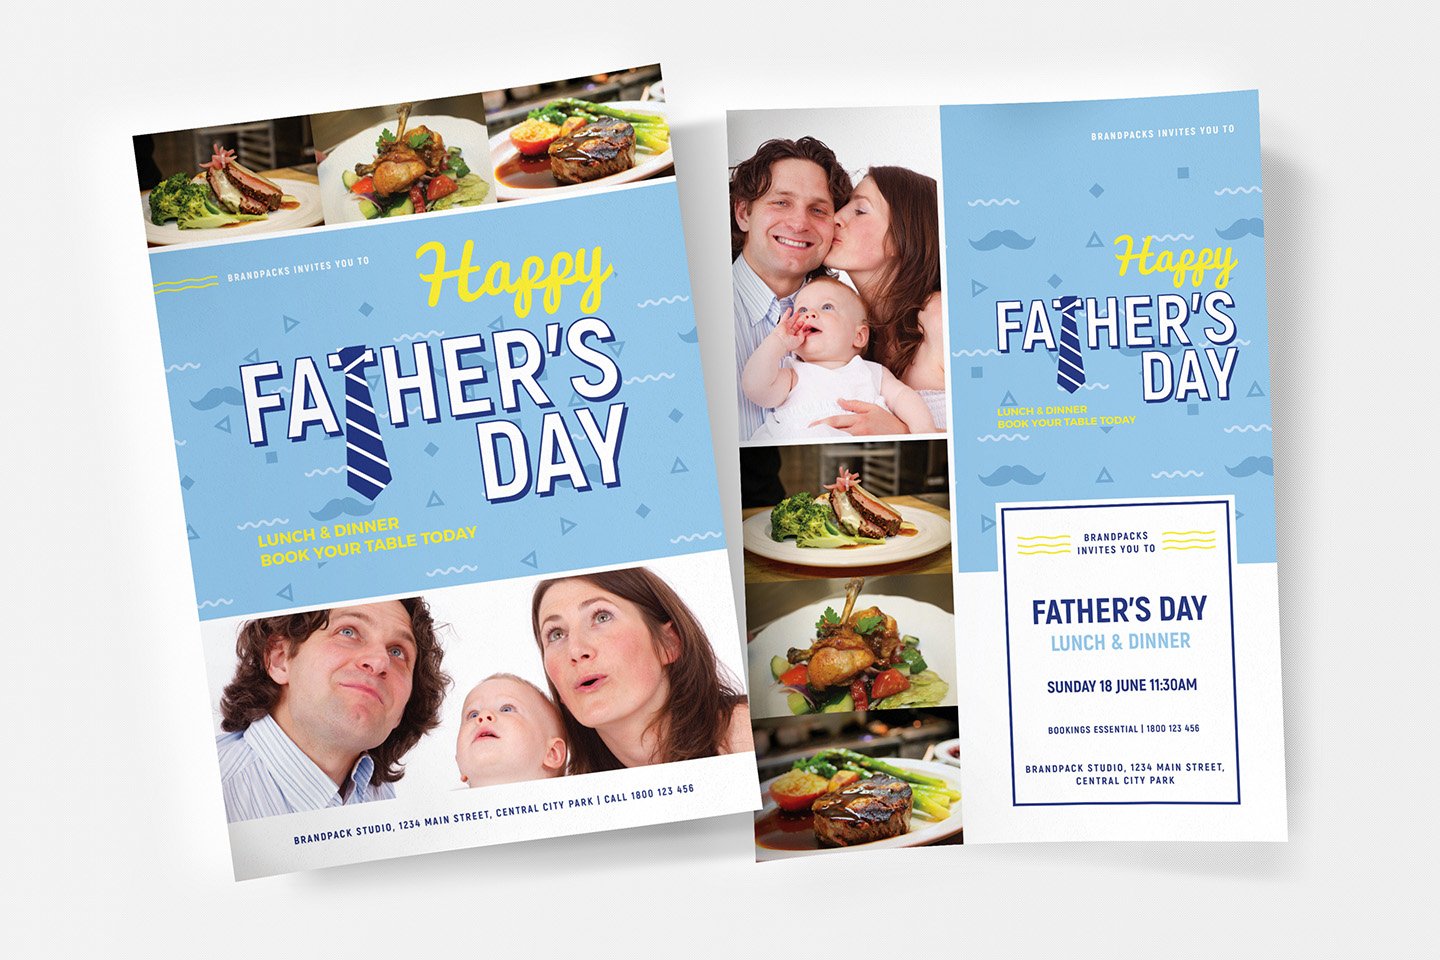 Fathers Day Poster / Flyer Templates cover image.